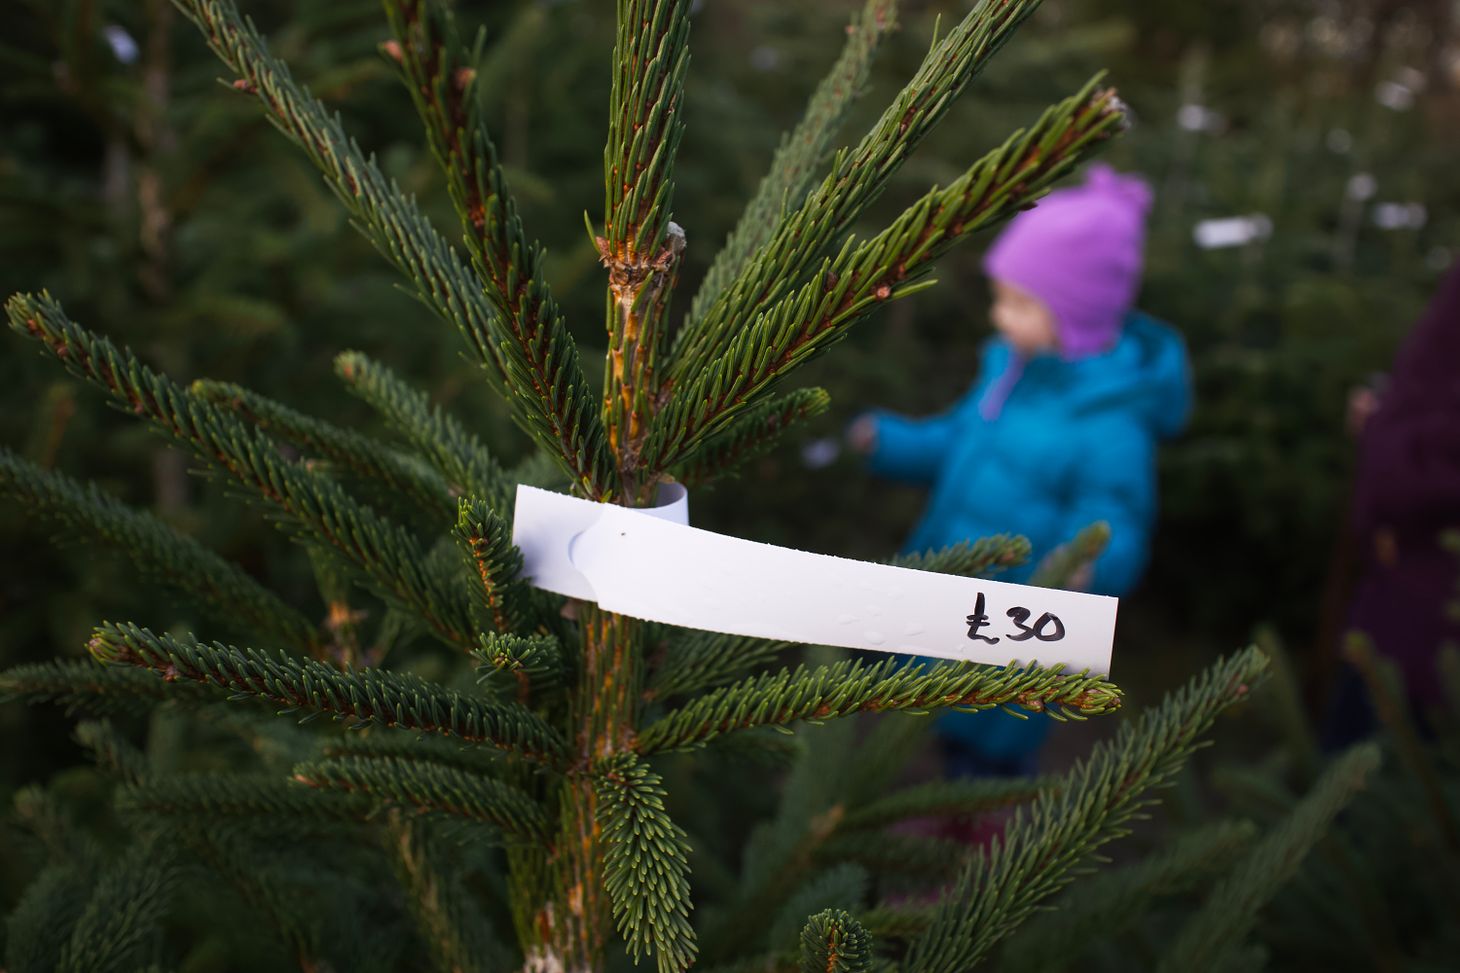 Spithandle Nursery: sustainable Sussex Christmas trees